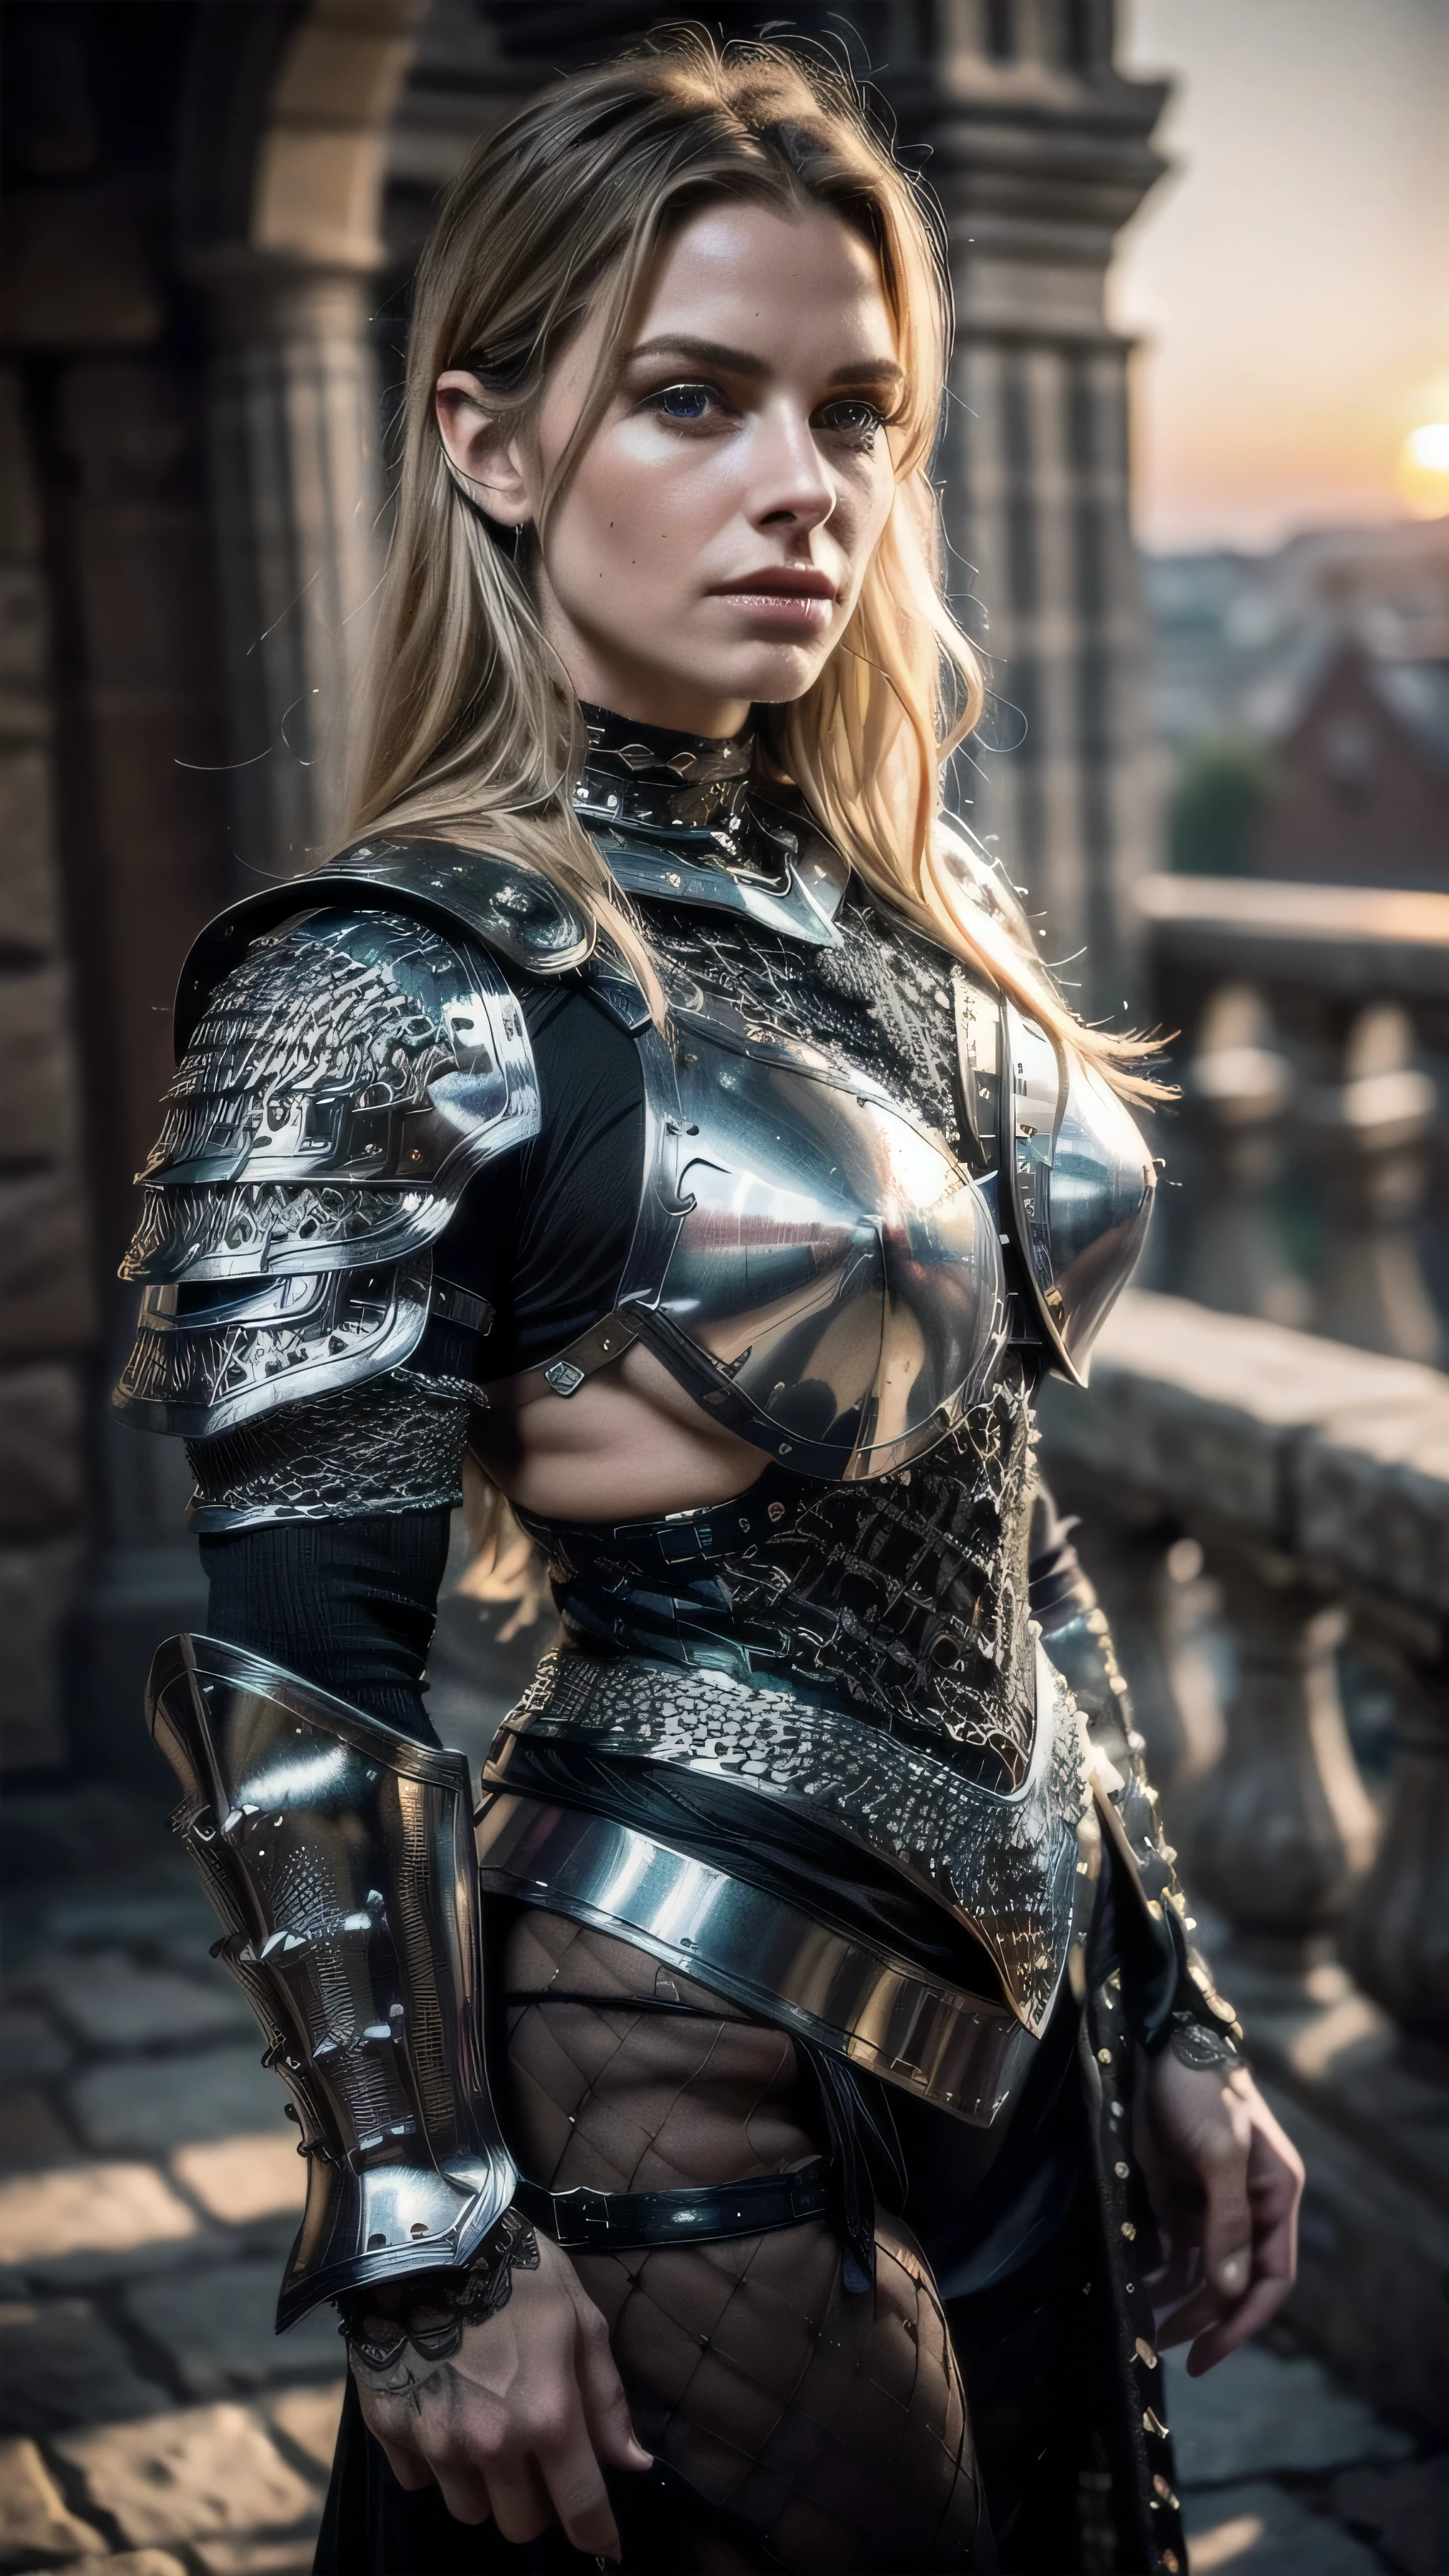 (masterpiece), (extremely intricate:1.3), (realistic), portrait of a muscular bodybuilder girl, ((((medieval armor:1.6 black gold filigree breastplate, perfectchainmail)), wind blown blowing [blonde hair:dark hair:0.6], [flat chest:large breasts:0.6], from below), tattoo:1.0), metal reflections, upper body, outdoors, intense sunlight, far away castle, professional photograph of a stunning woman detailed, (short undercut dark shaved hair, dynamic pose), sharp focus, dramatic, award winning, cinematic lighting, volumetrics dtx, (film grain, blurry background, blurry foreground, bokeh, depth of field, sunset, interaction, blackiron Perfectchainmail ribbons), 8K